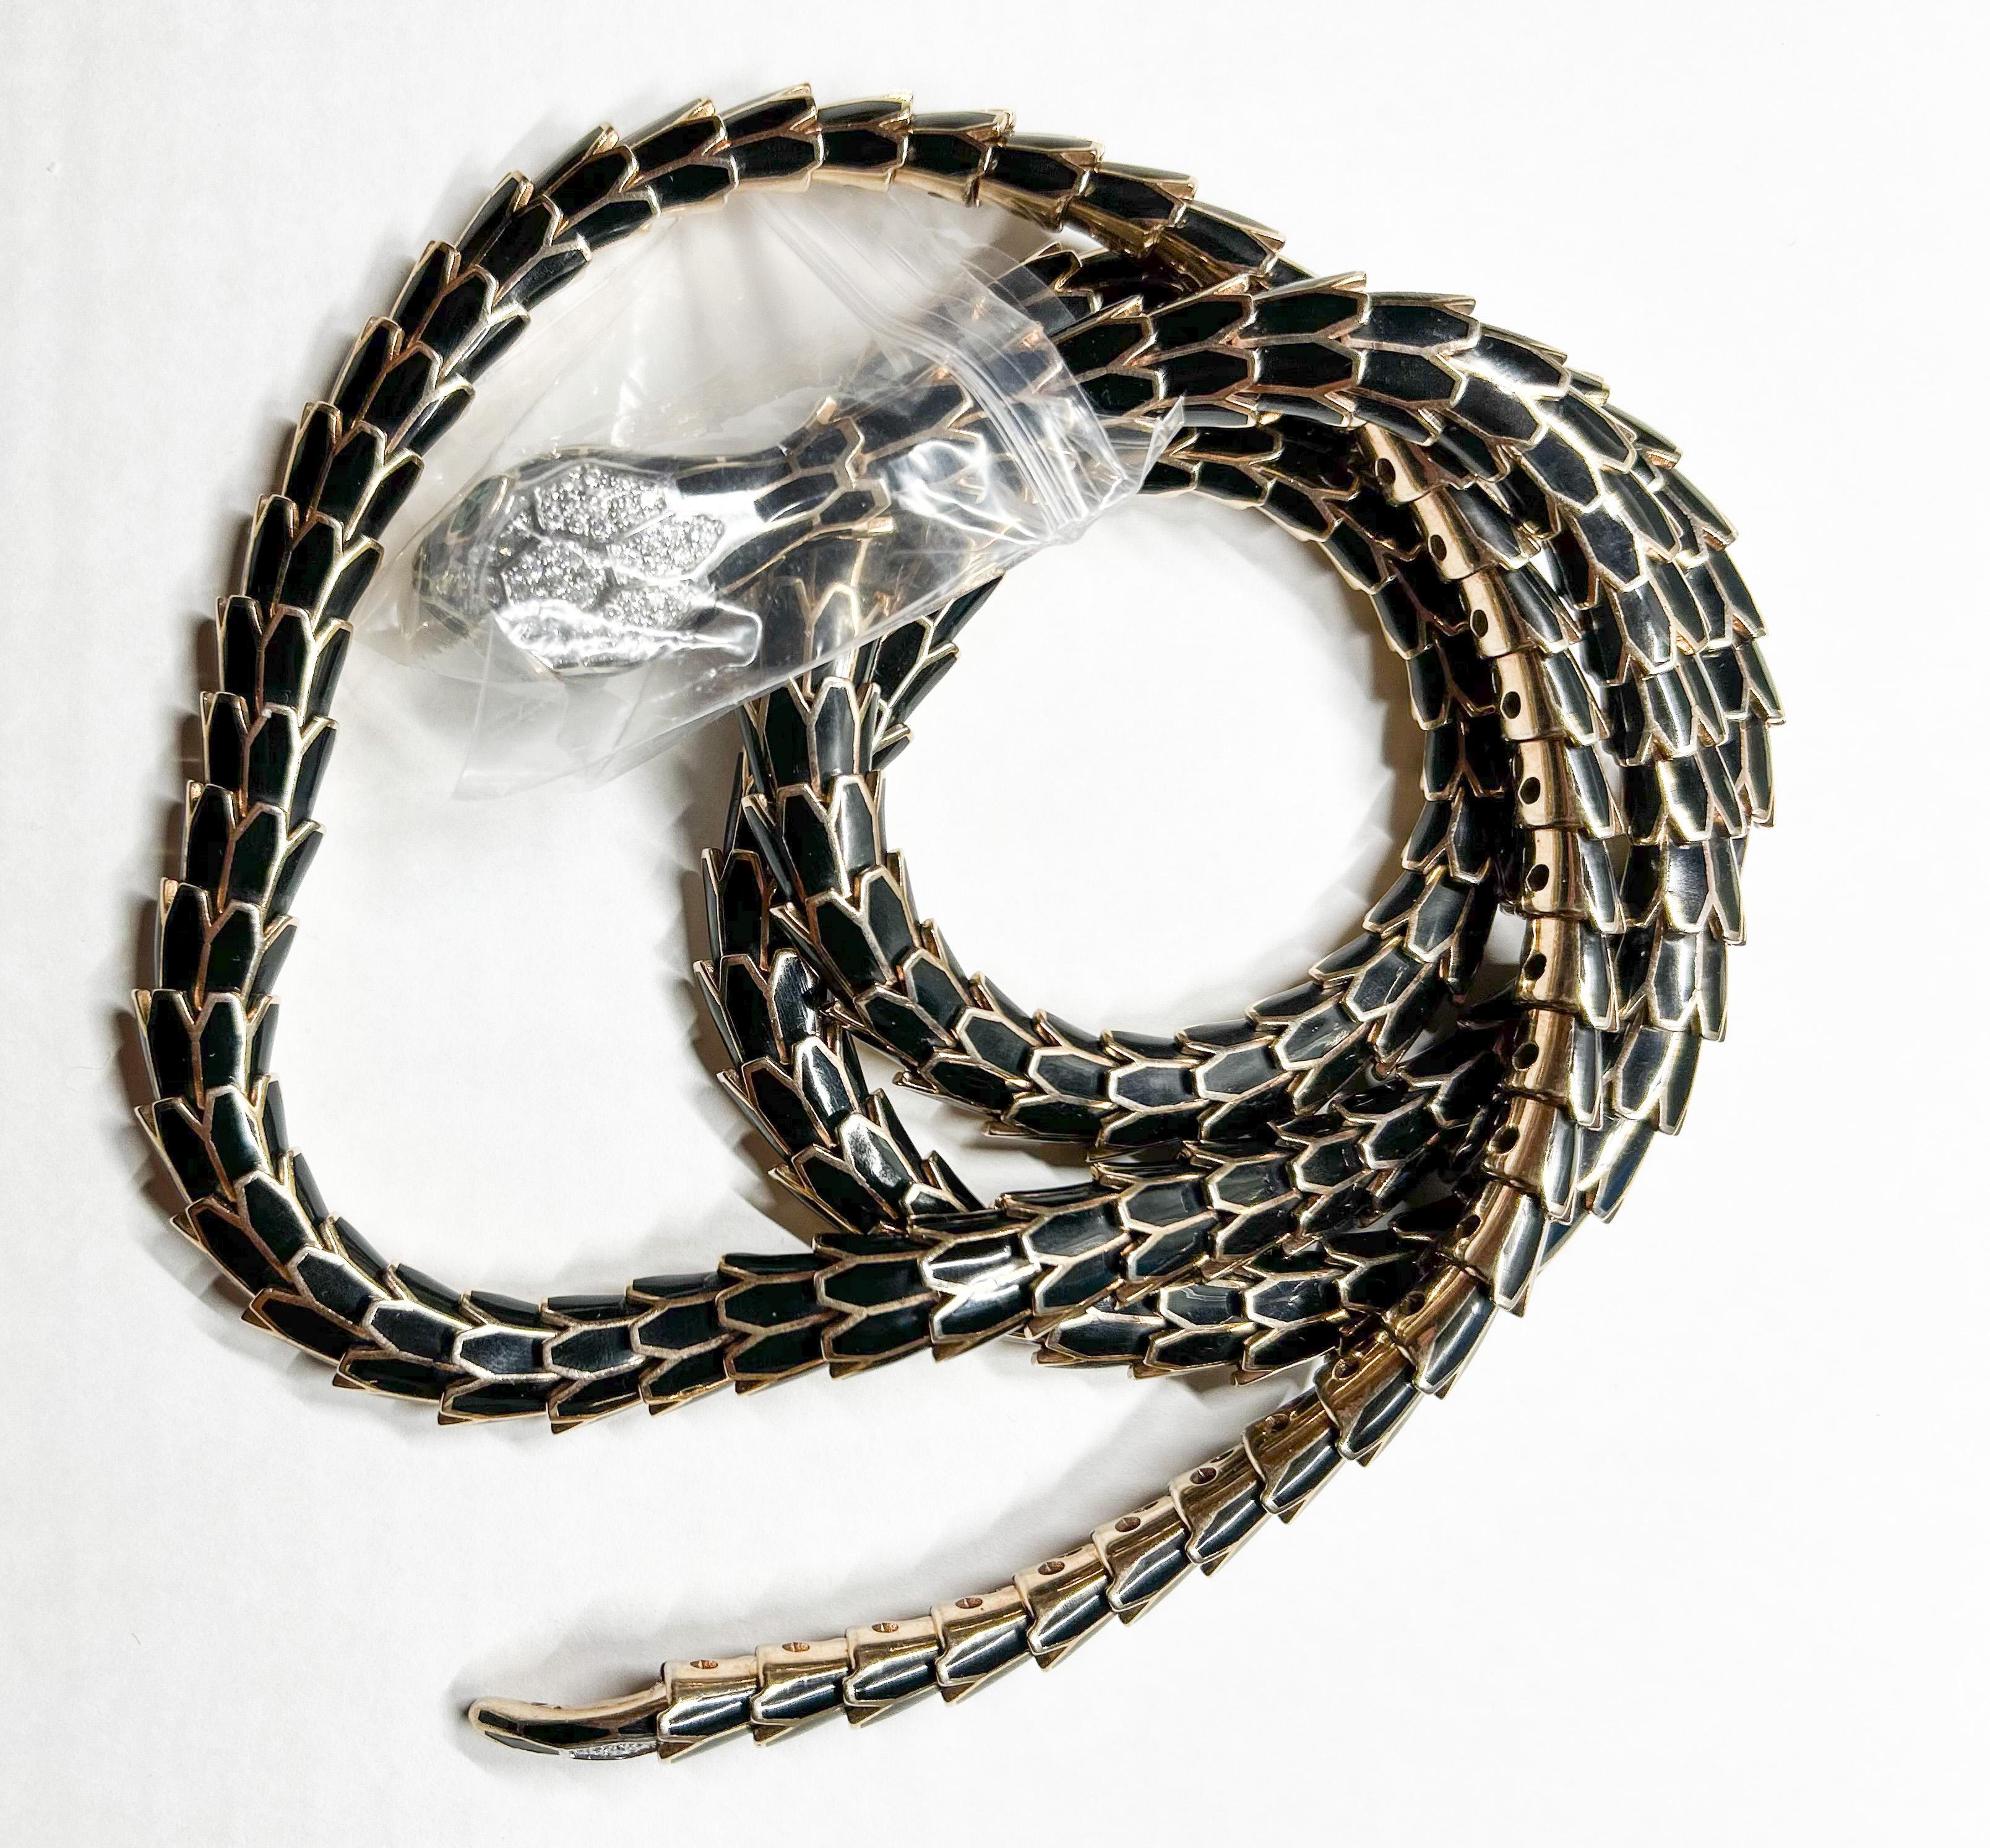 Introducing the Alexis Enamel 18K White Gold and Sterling Silver Snake Necklace Belt, a stunning and enigmatic jewelry piece that combines striking design with precious gemstones to create a unique and captivating accessory. 

This snake